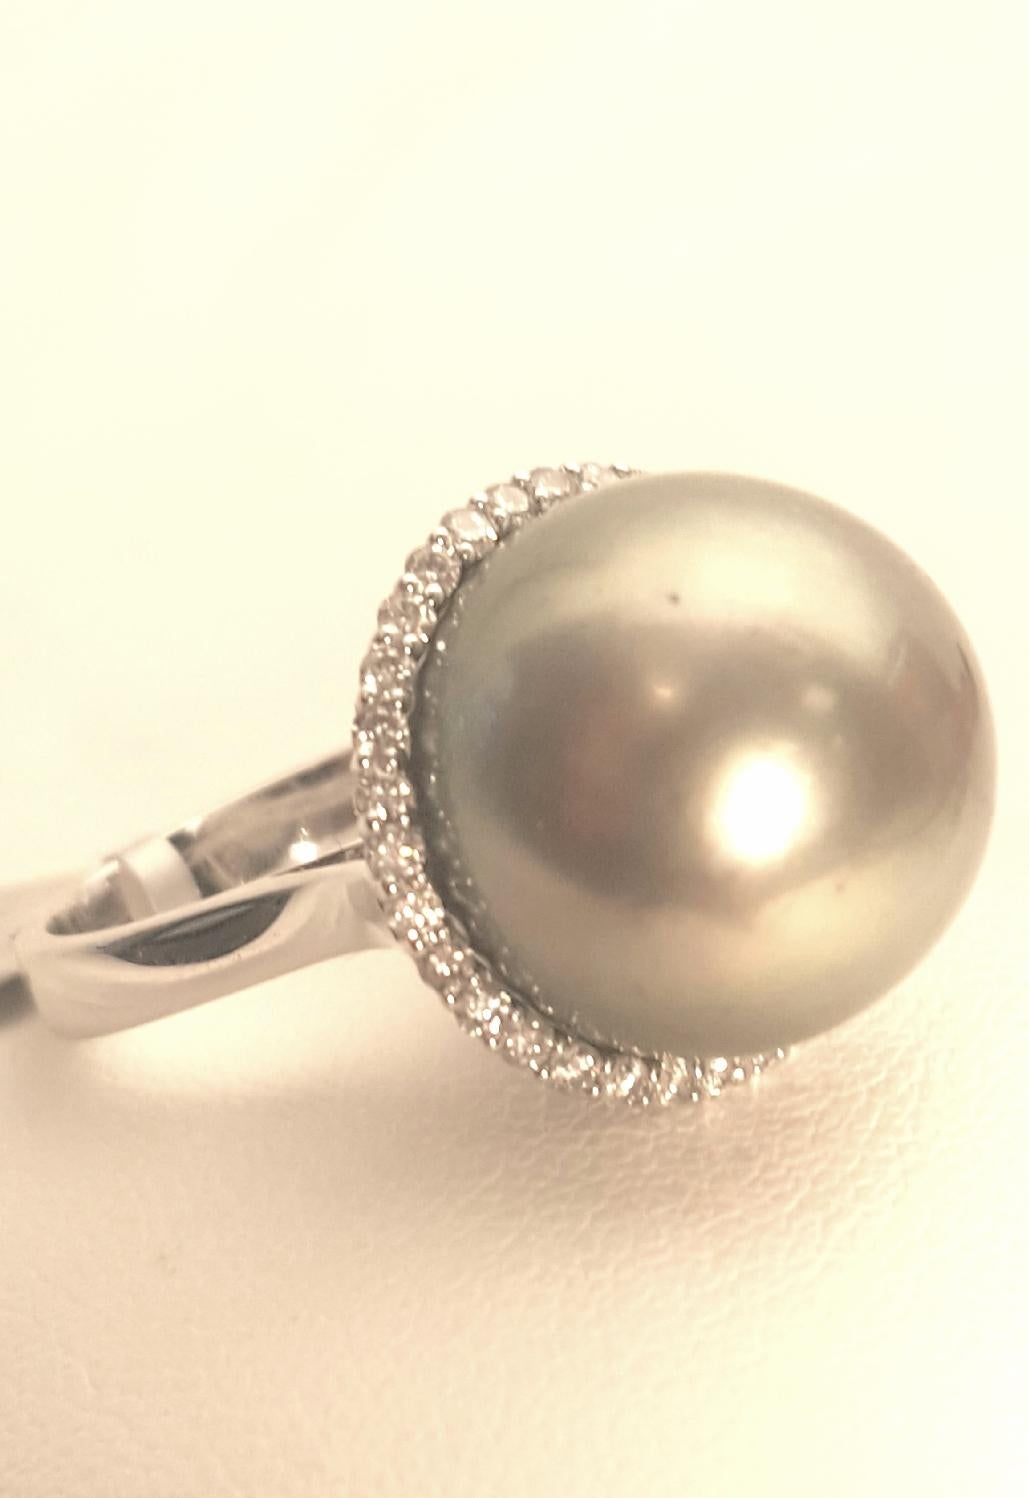 Brand New!  A fabulous statement ring fabricated in 18 karat white gold!  An impressive Tahitian South Sea pearl in a lovely shade of gray measuring 15-16mm is the focal point.  A row of micro pave white diamonds frames the pearl.  Diamond weight